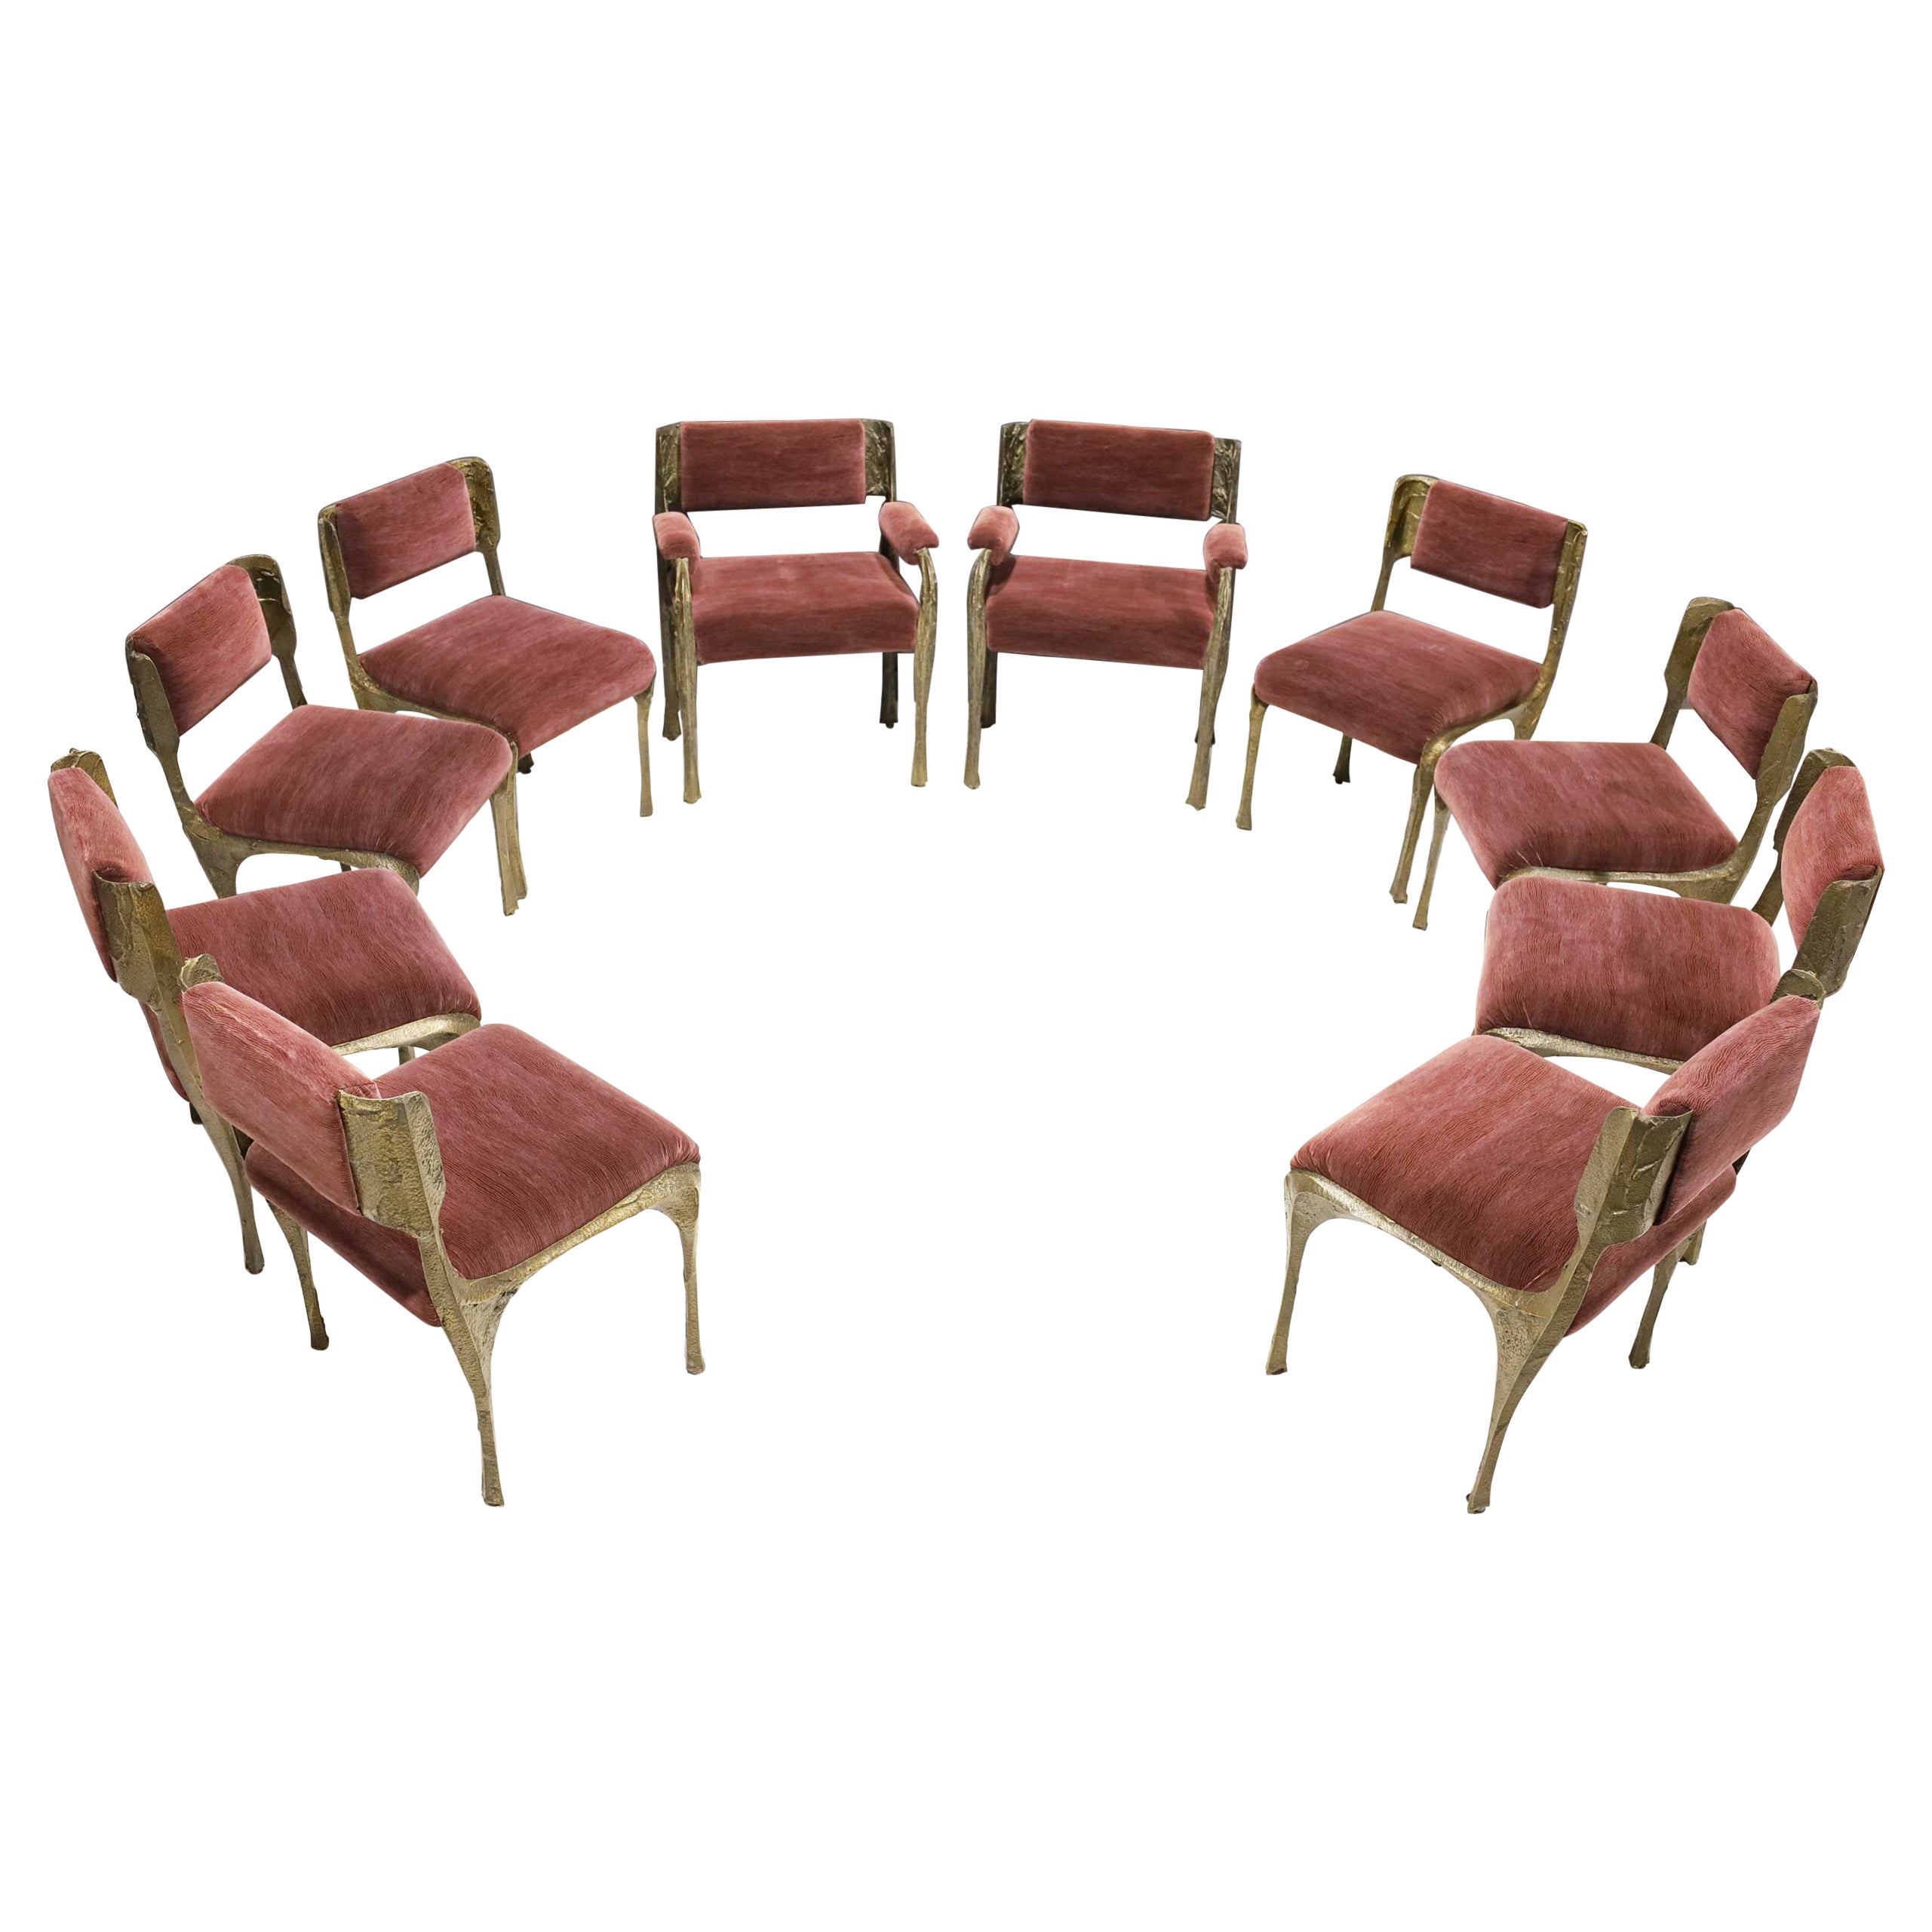 Paul Evans Set of Ten Sculpted Bronze Dining Chairs in Aubergine Upholstery